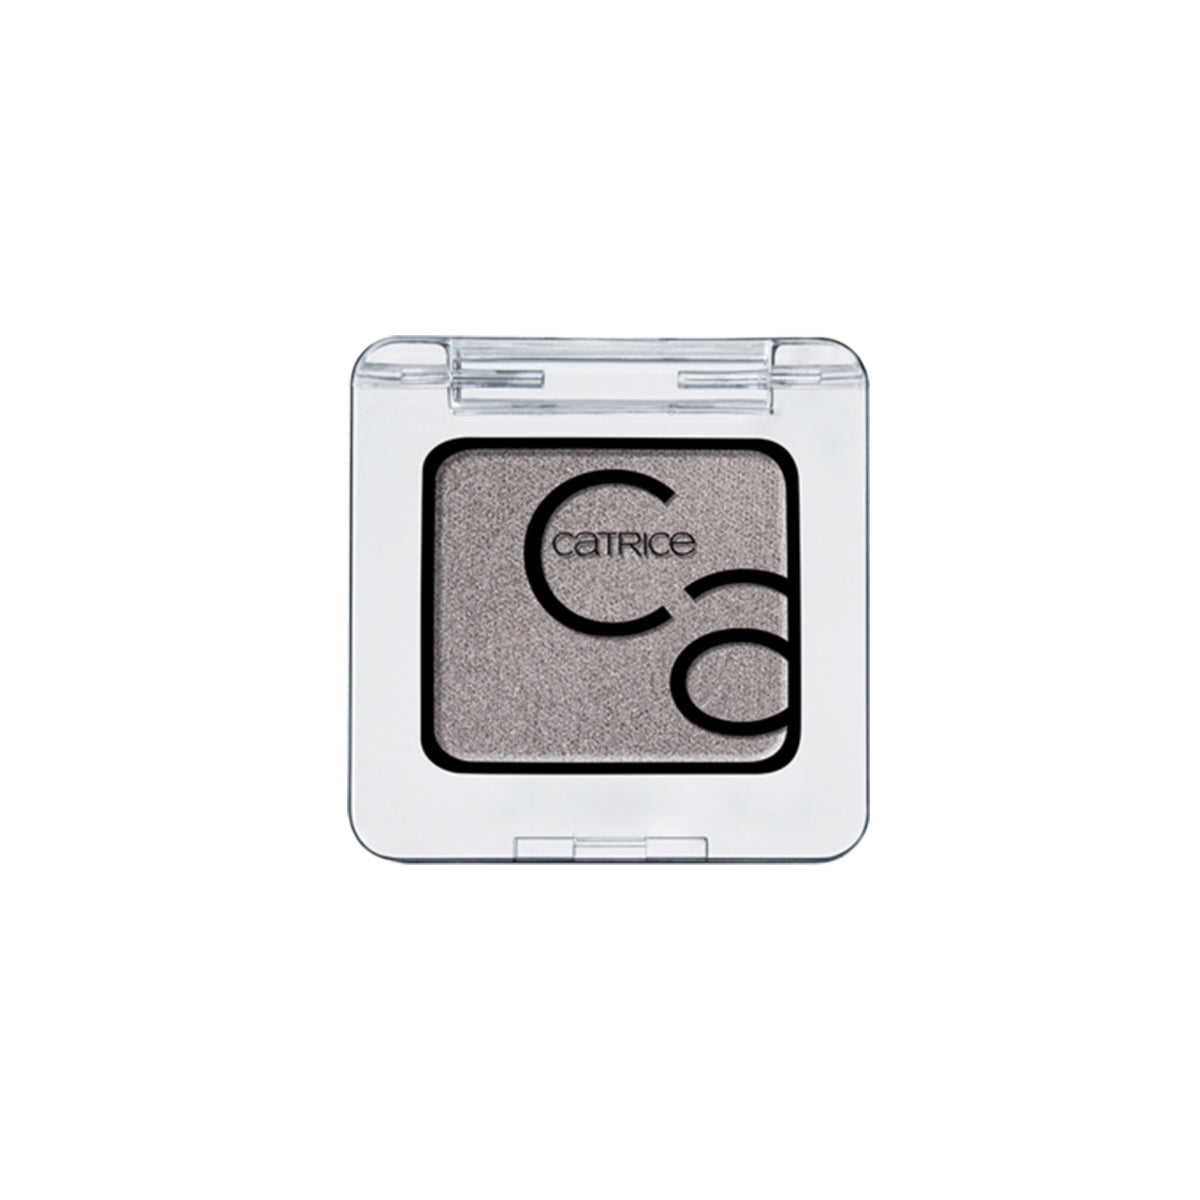 ART COULEURS EYESHADOWS 130 MR GREY AND ME - CATRICE